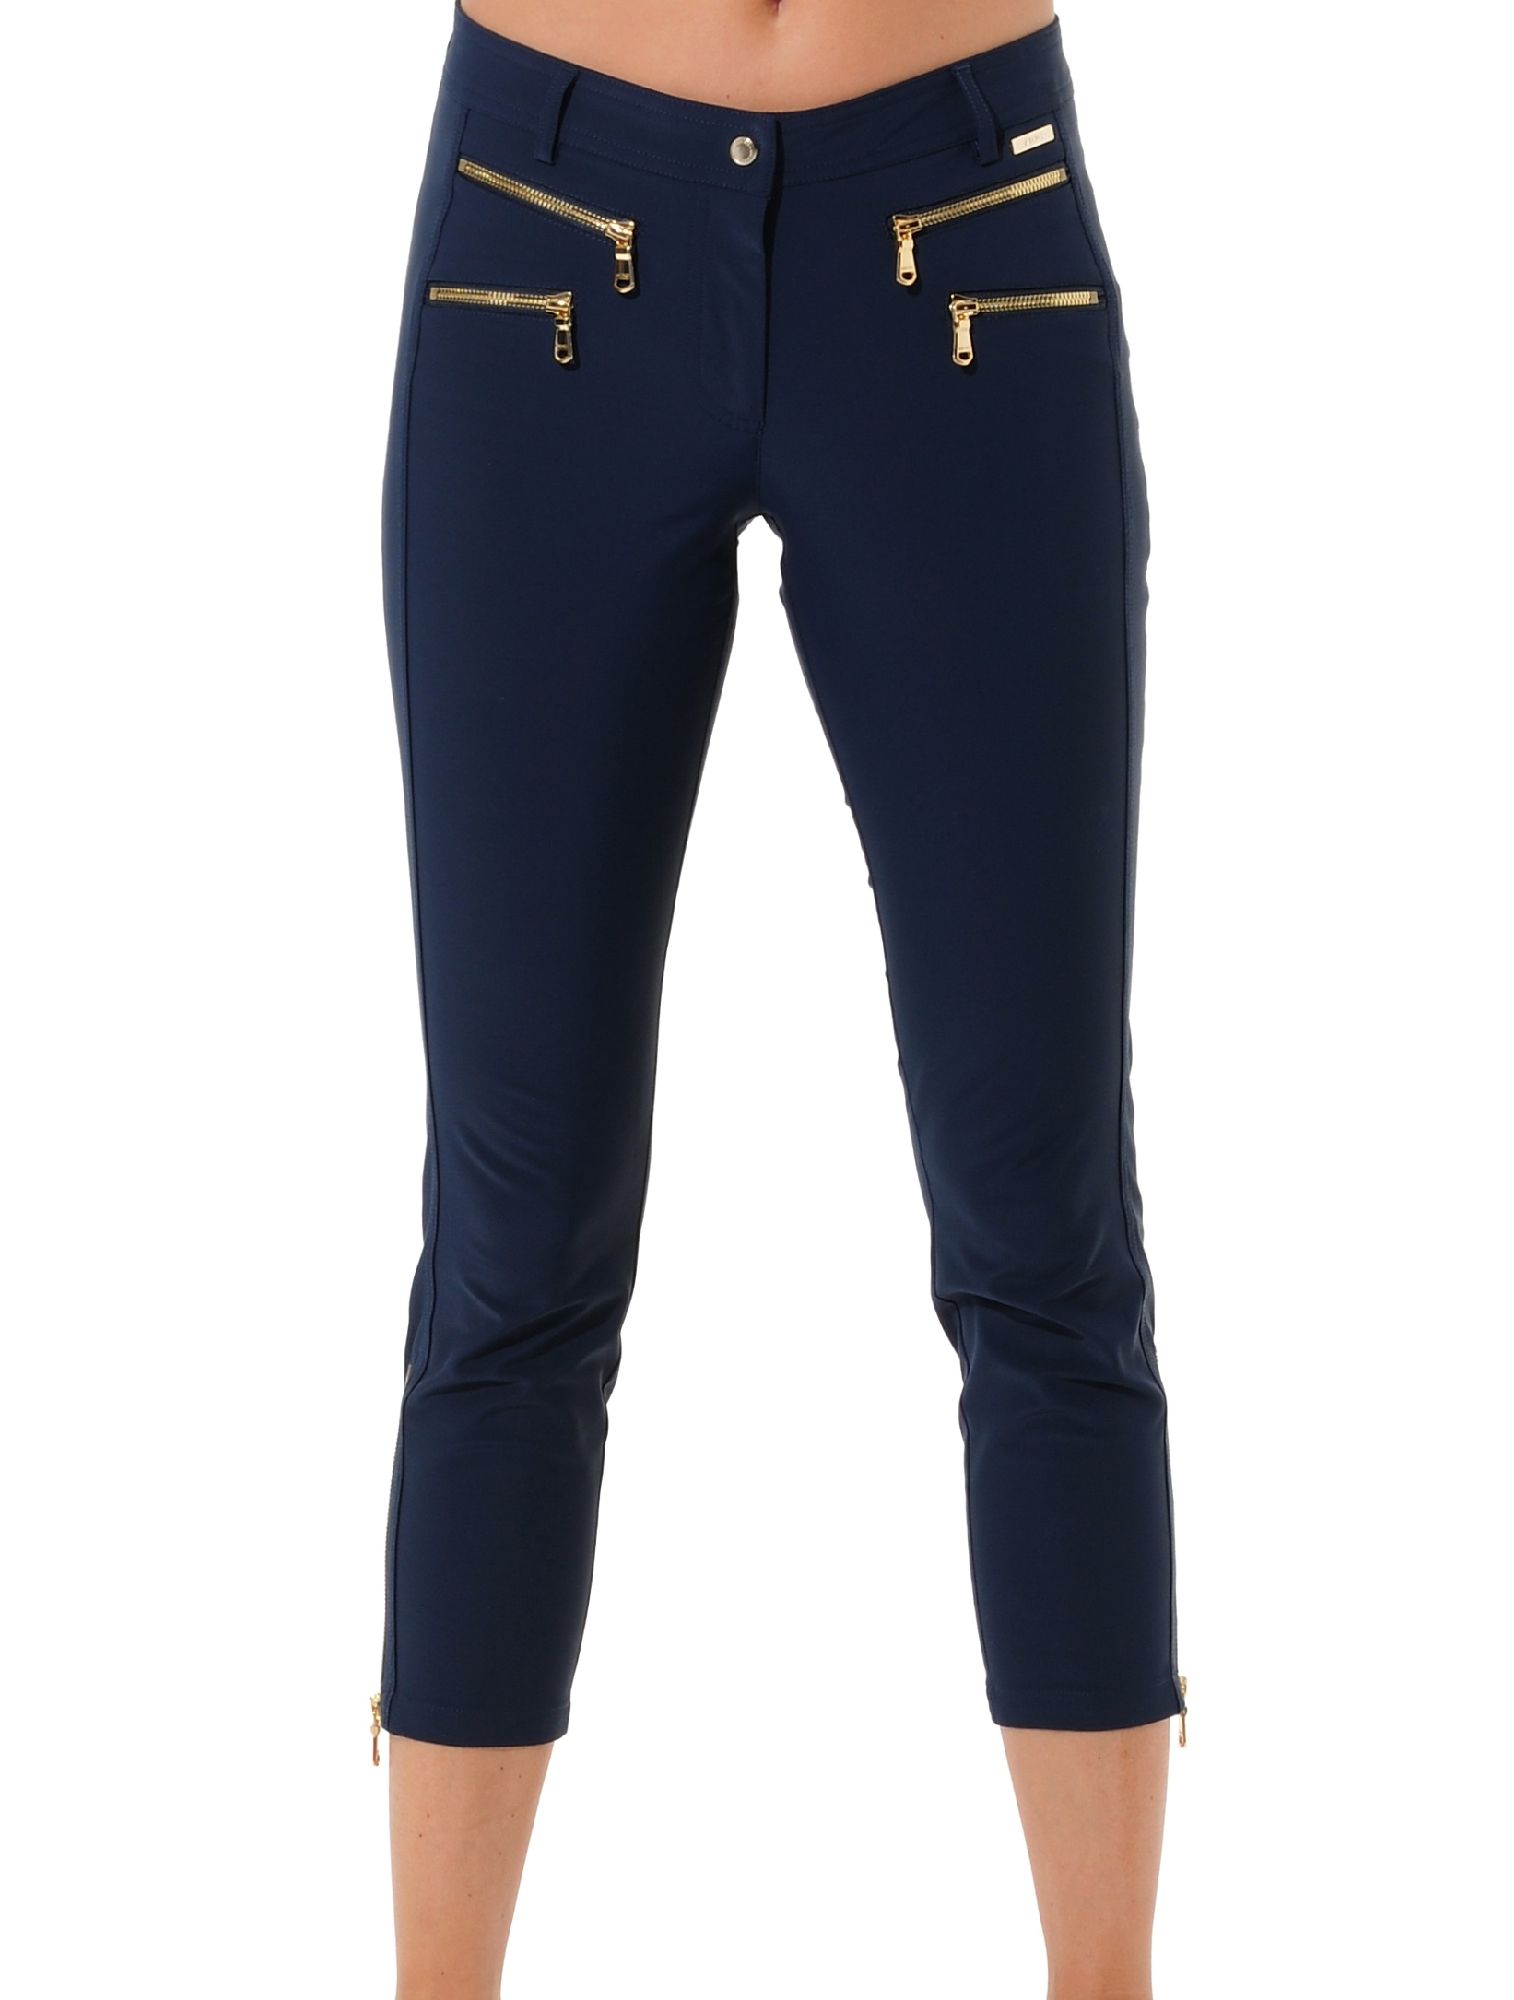 4way stretch shiny gold double zip cropped pants navy 